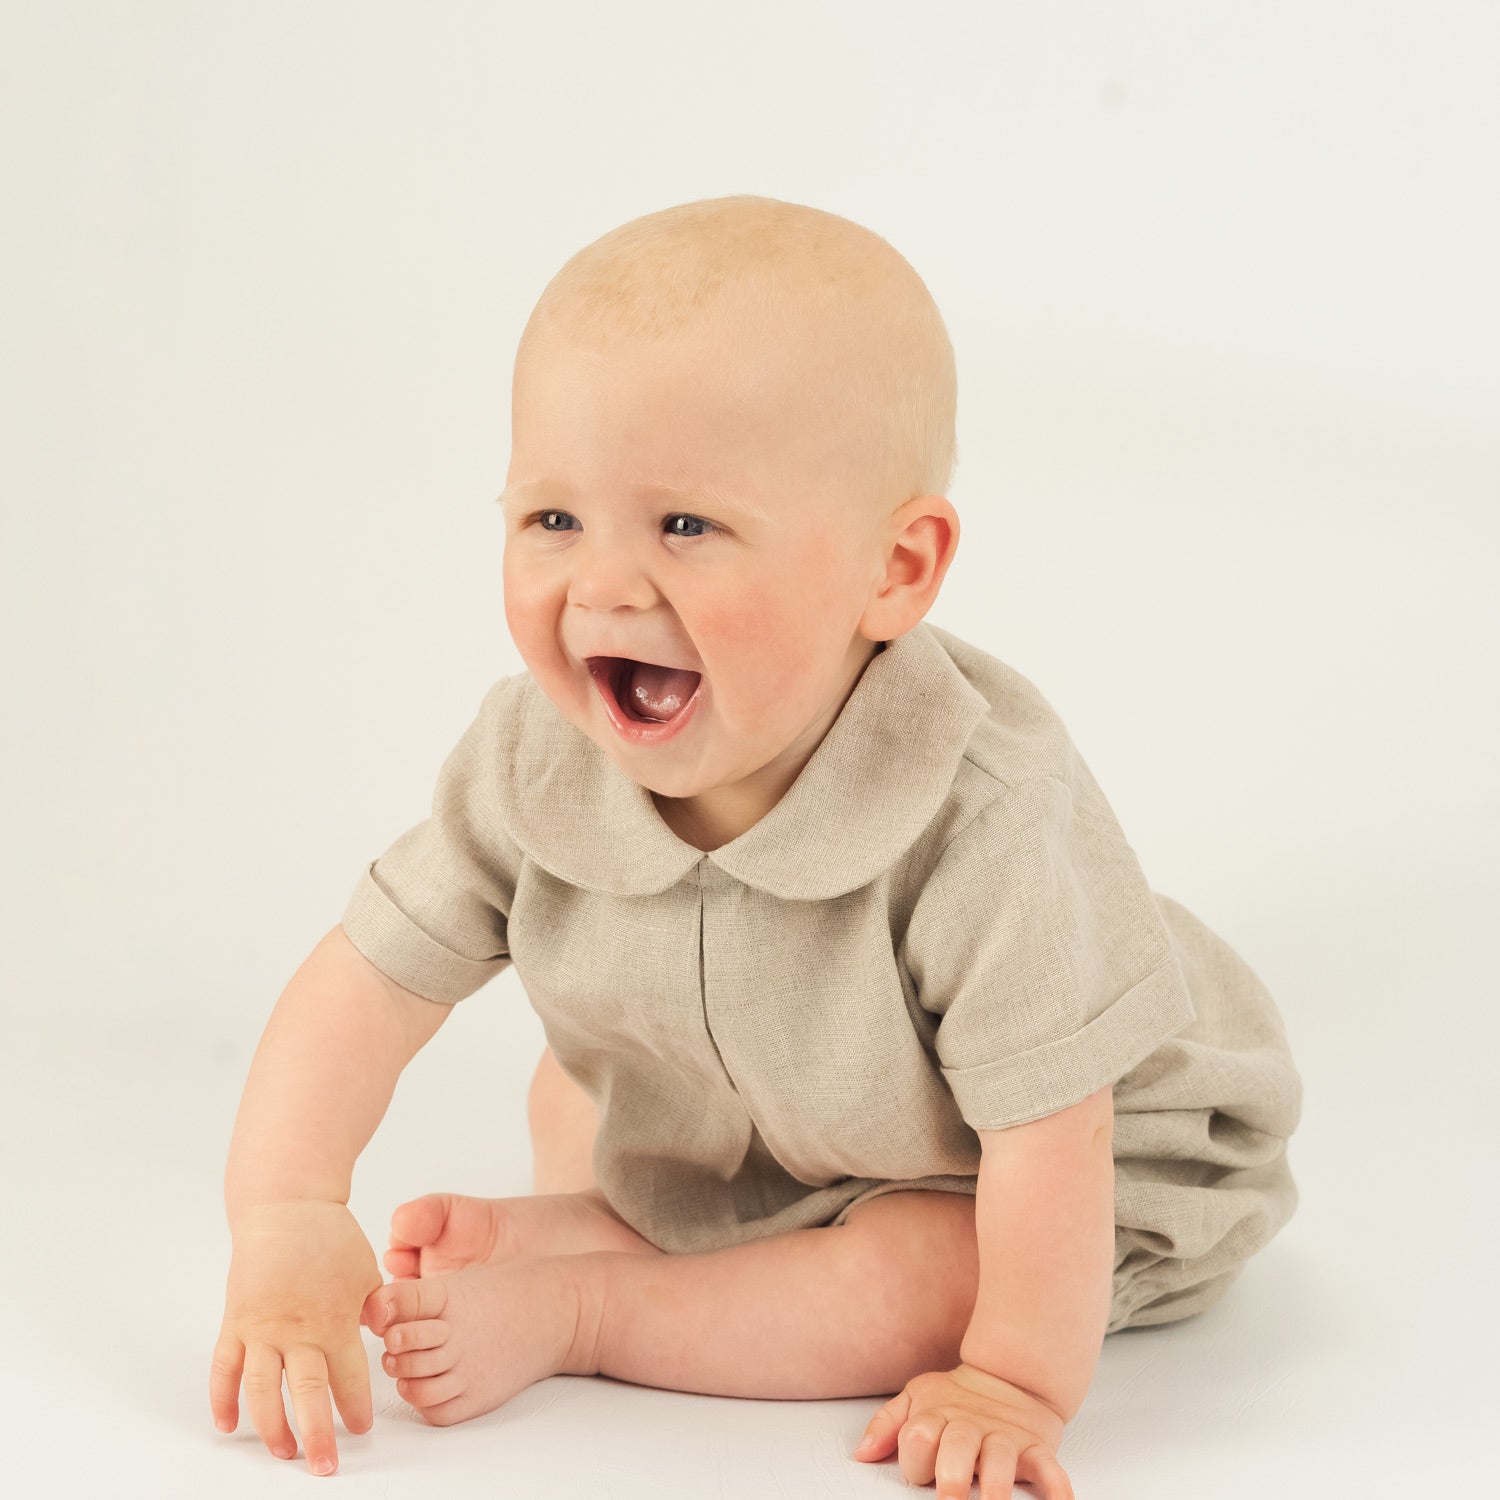 Happy Baby Boy wearing Organic Linen Shirt and Bloomers by Twee and Co